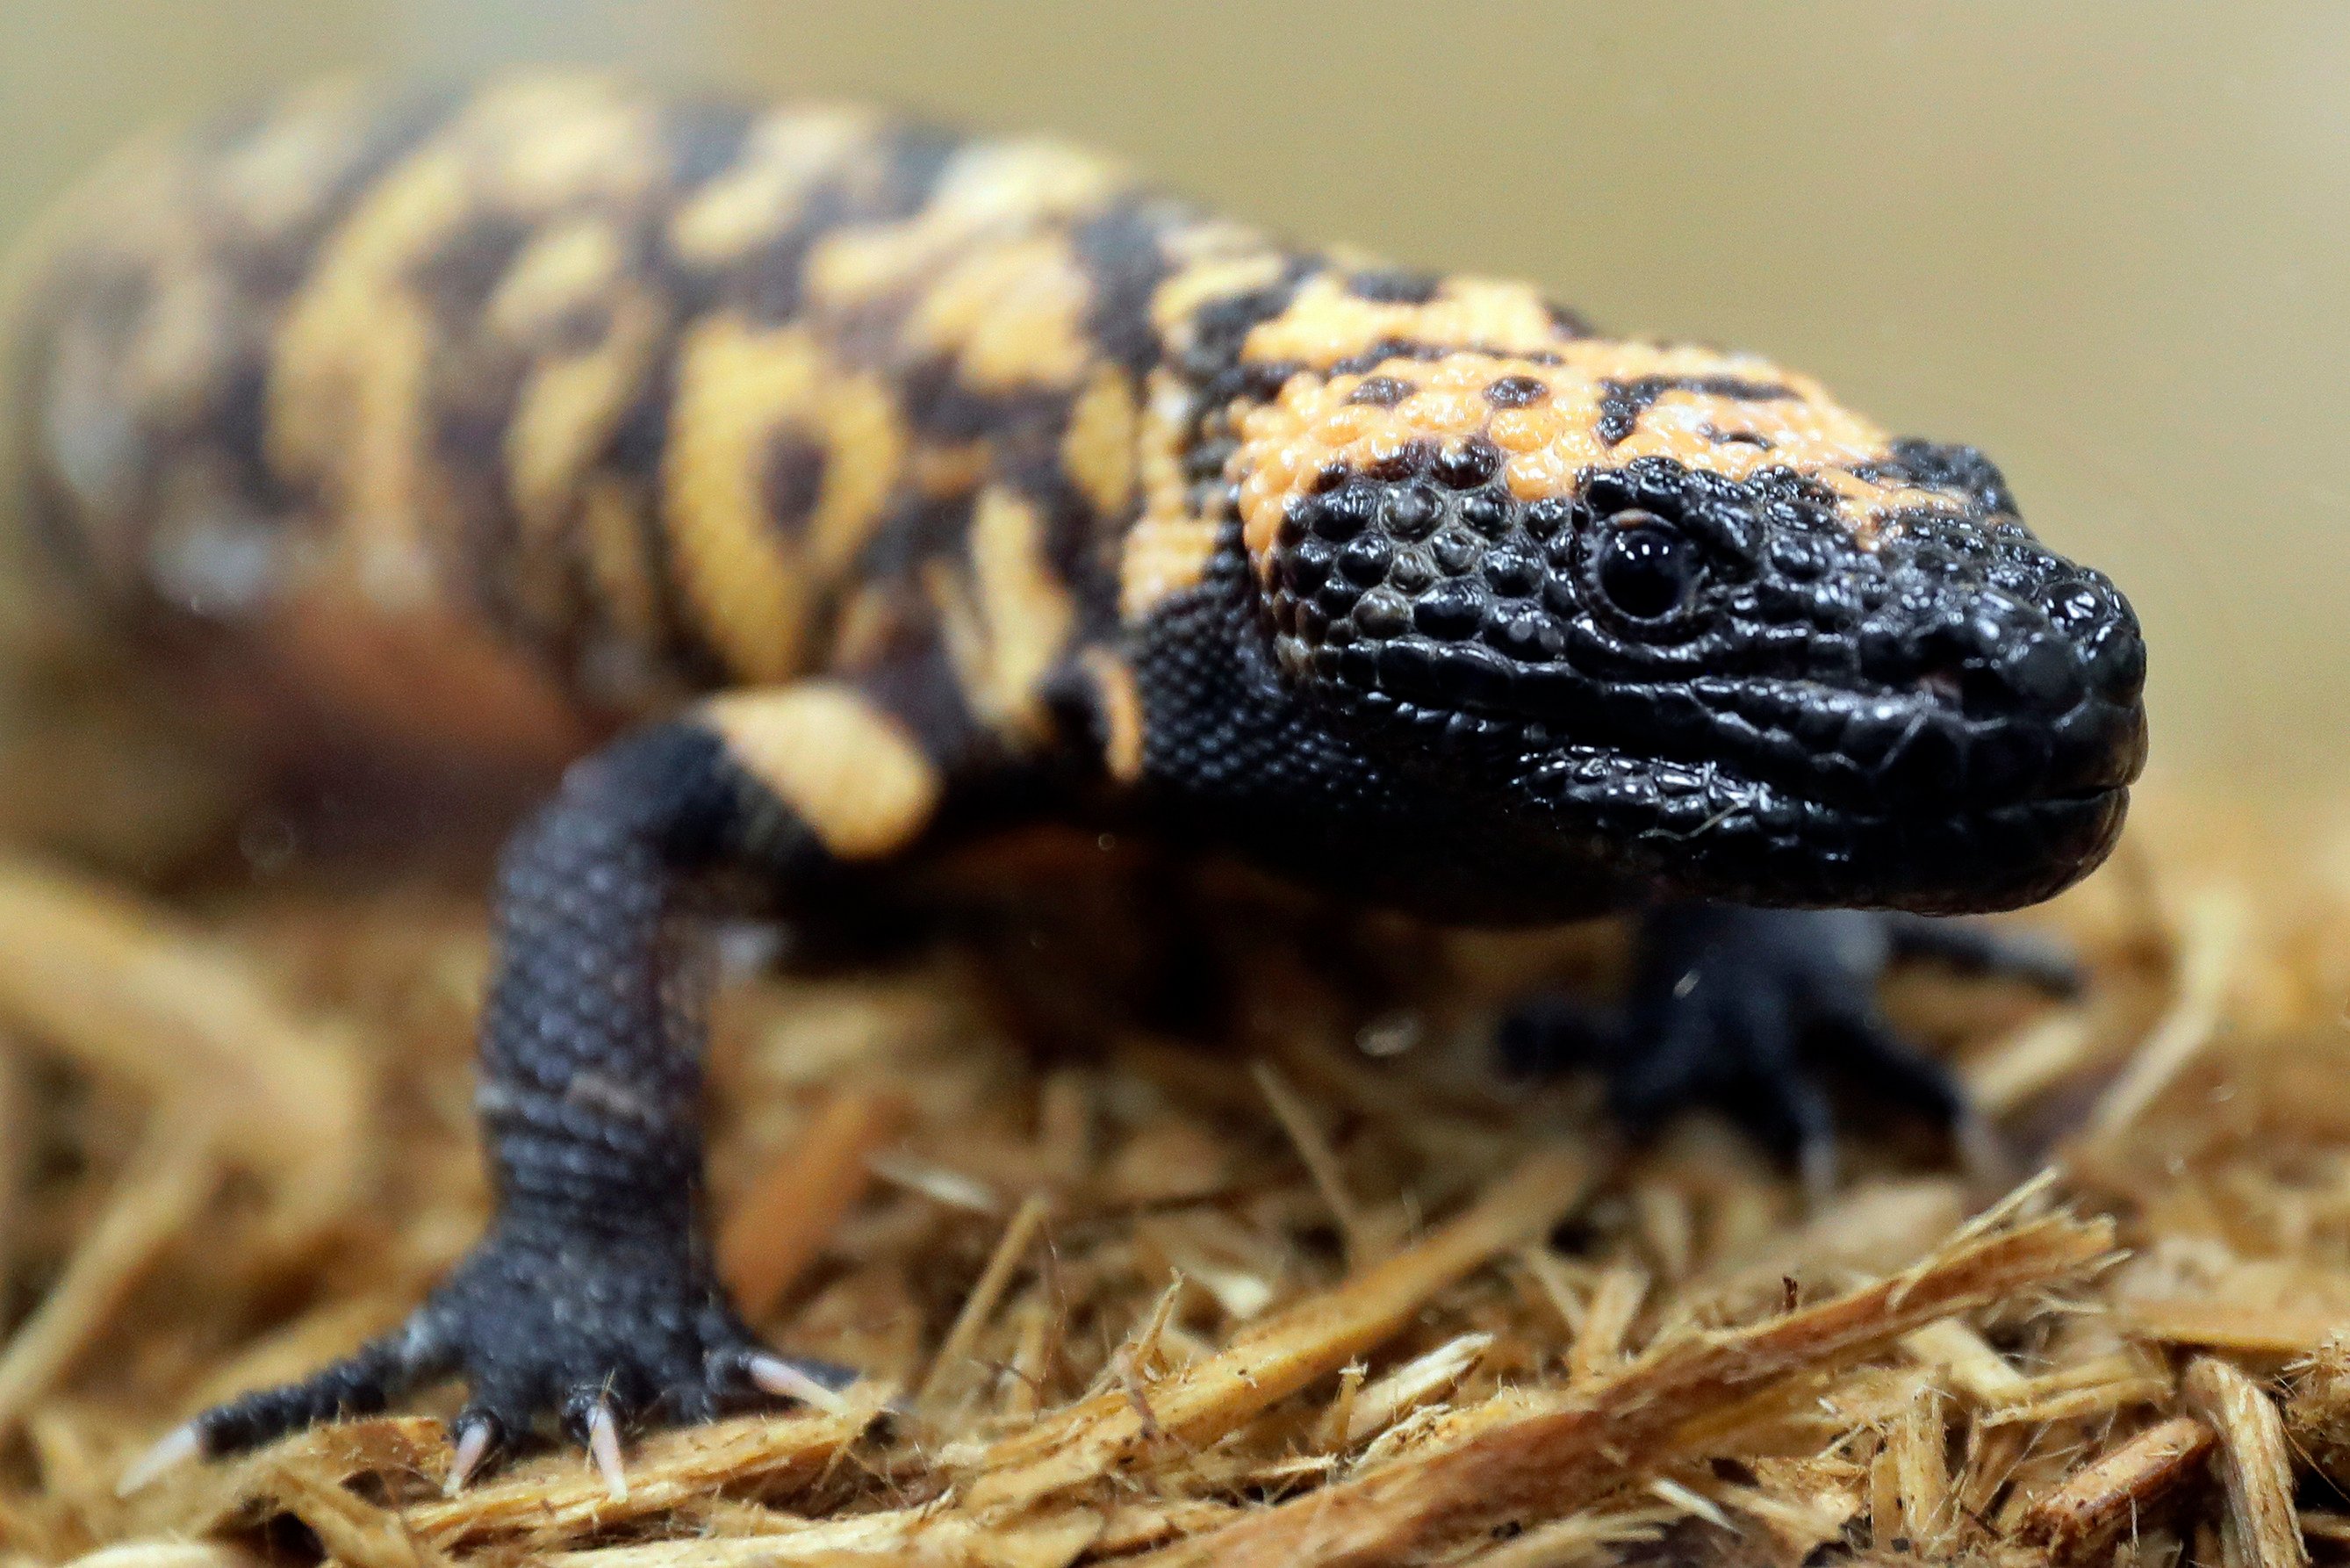 A 34-year-old man in the US state of Colorado died after being bitten by his pet Gila monster in a very rare occurrence. Photo: AP